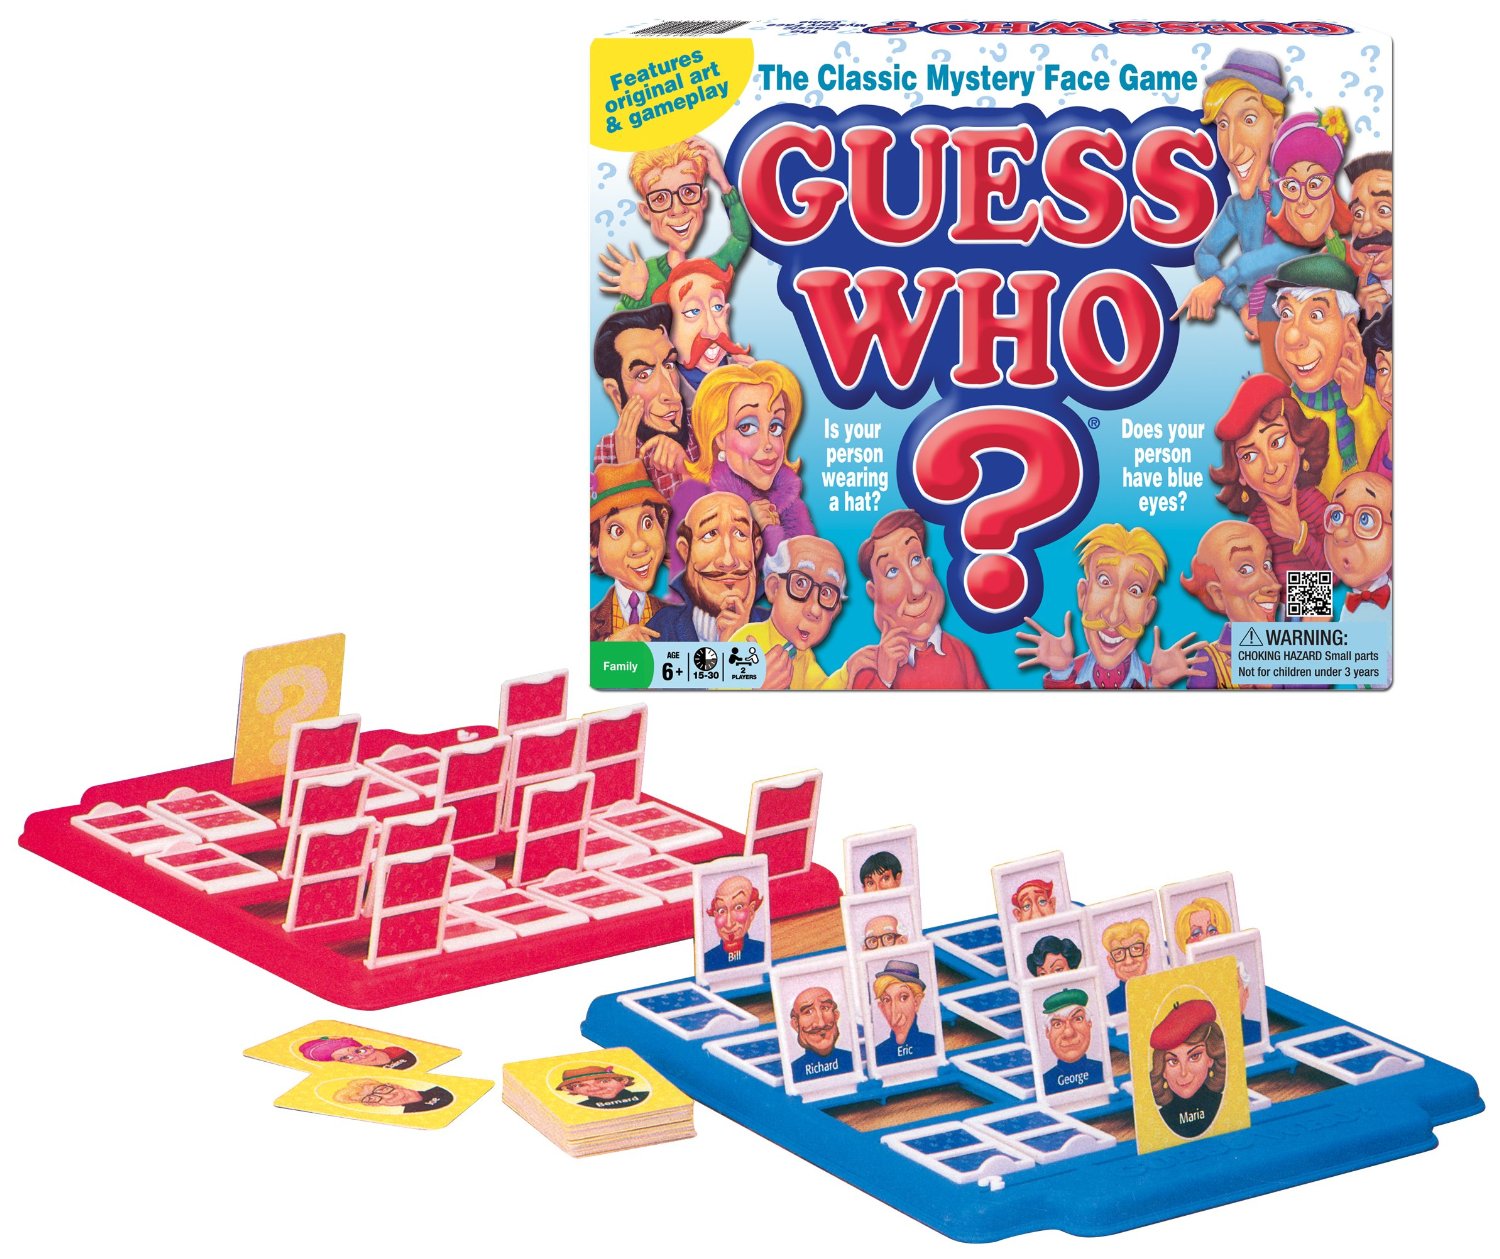 The Two Player Game of Guess Who? All About Fun and Games